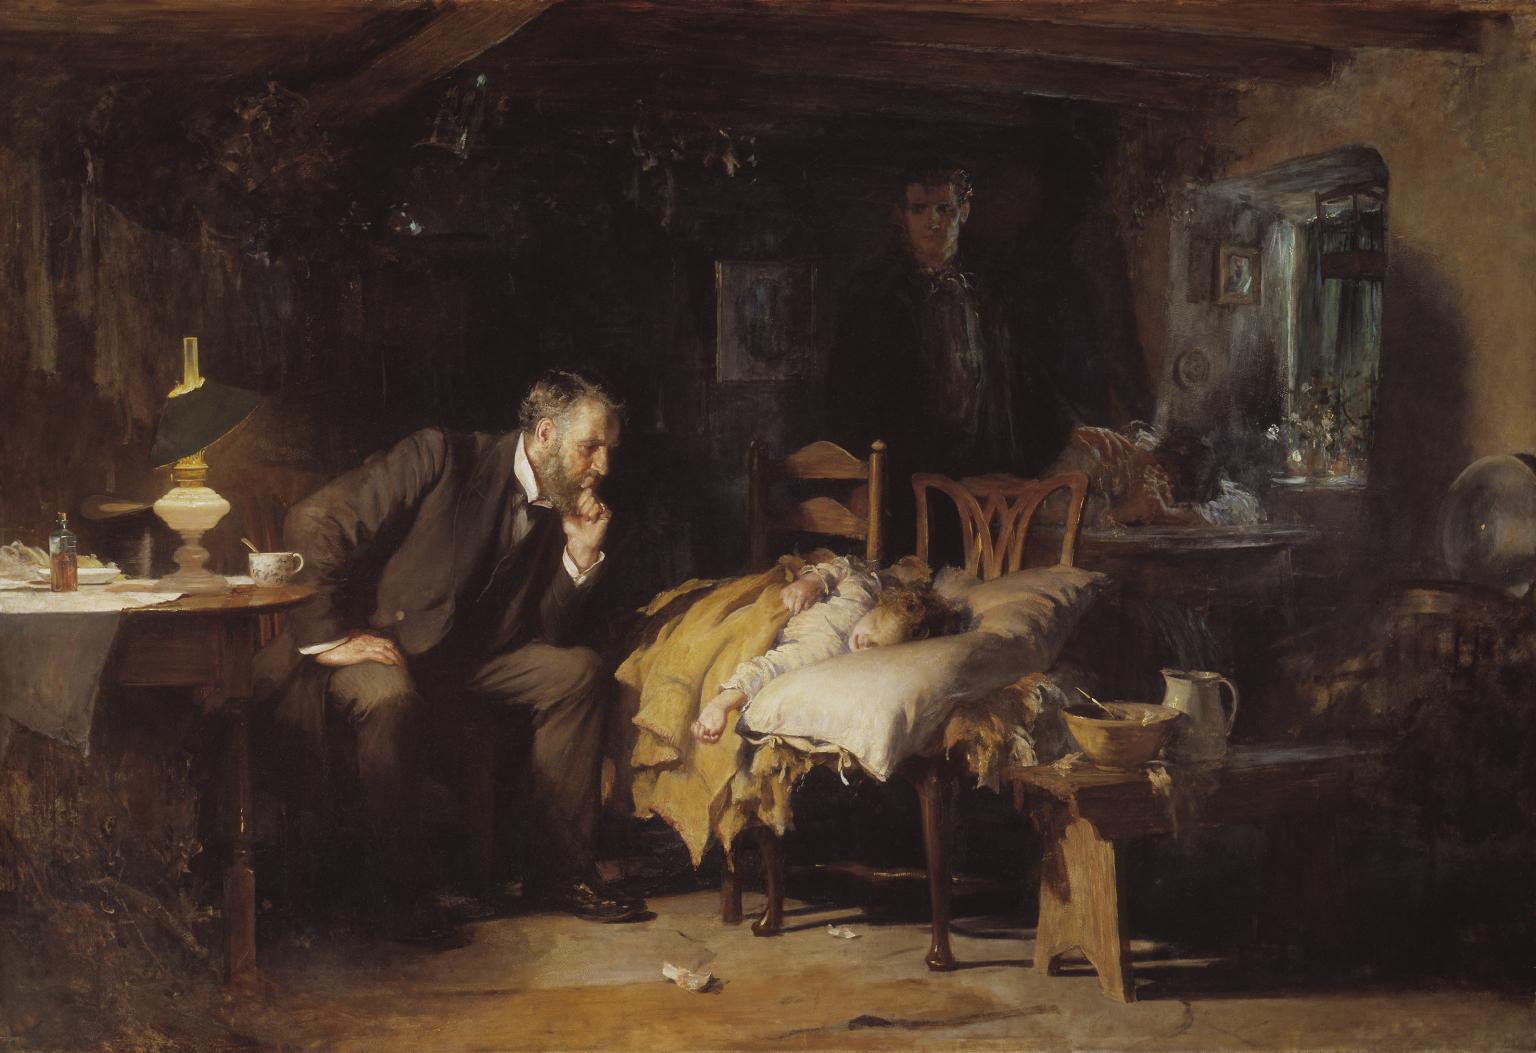 The Doctor exhibited 1891 Sir Luke Fildes 1843-1927 Presented by Sir Henry Tate 1894 http://www.tate.org.uk/art/work/N01522